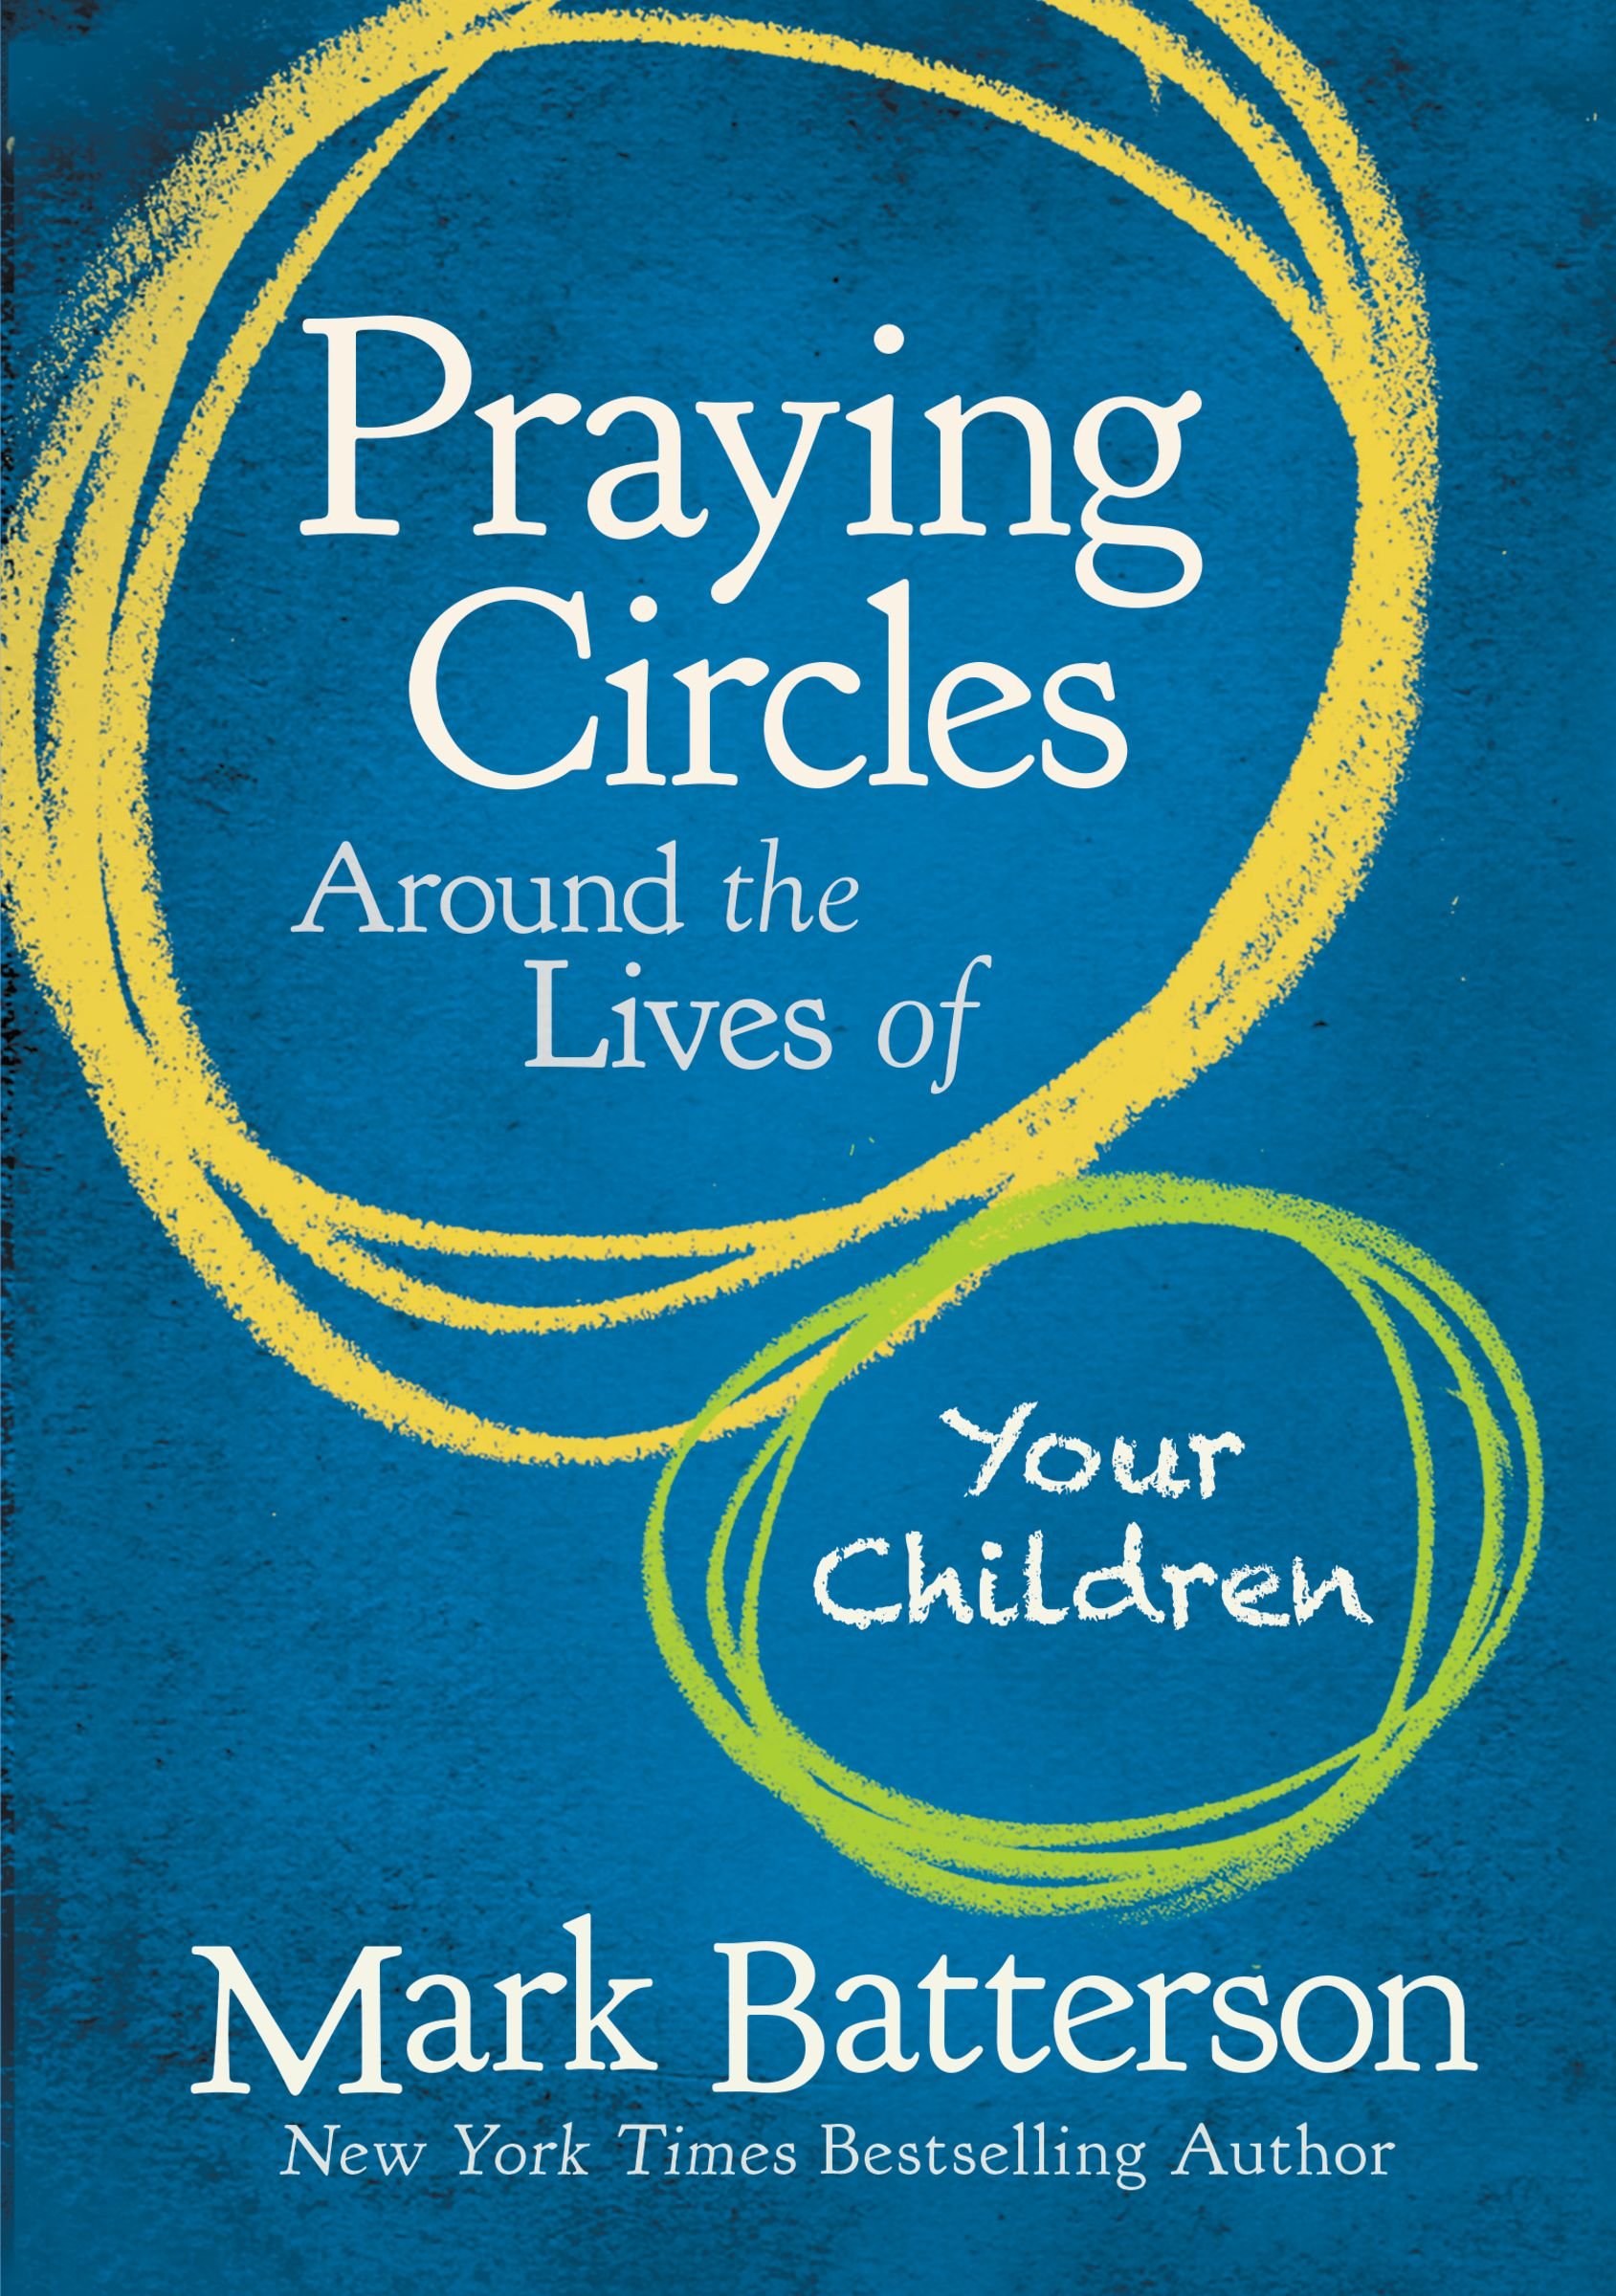 Praying Circles Around The Lives Of Your Children By Mark Batterson